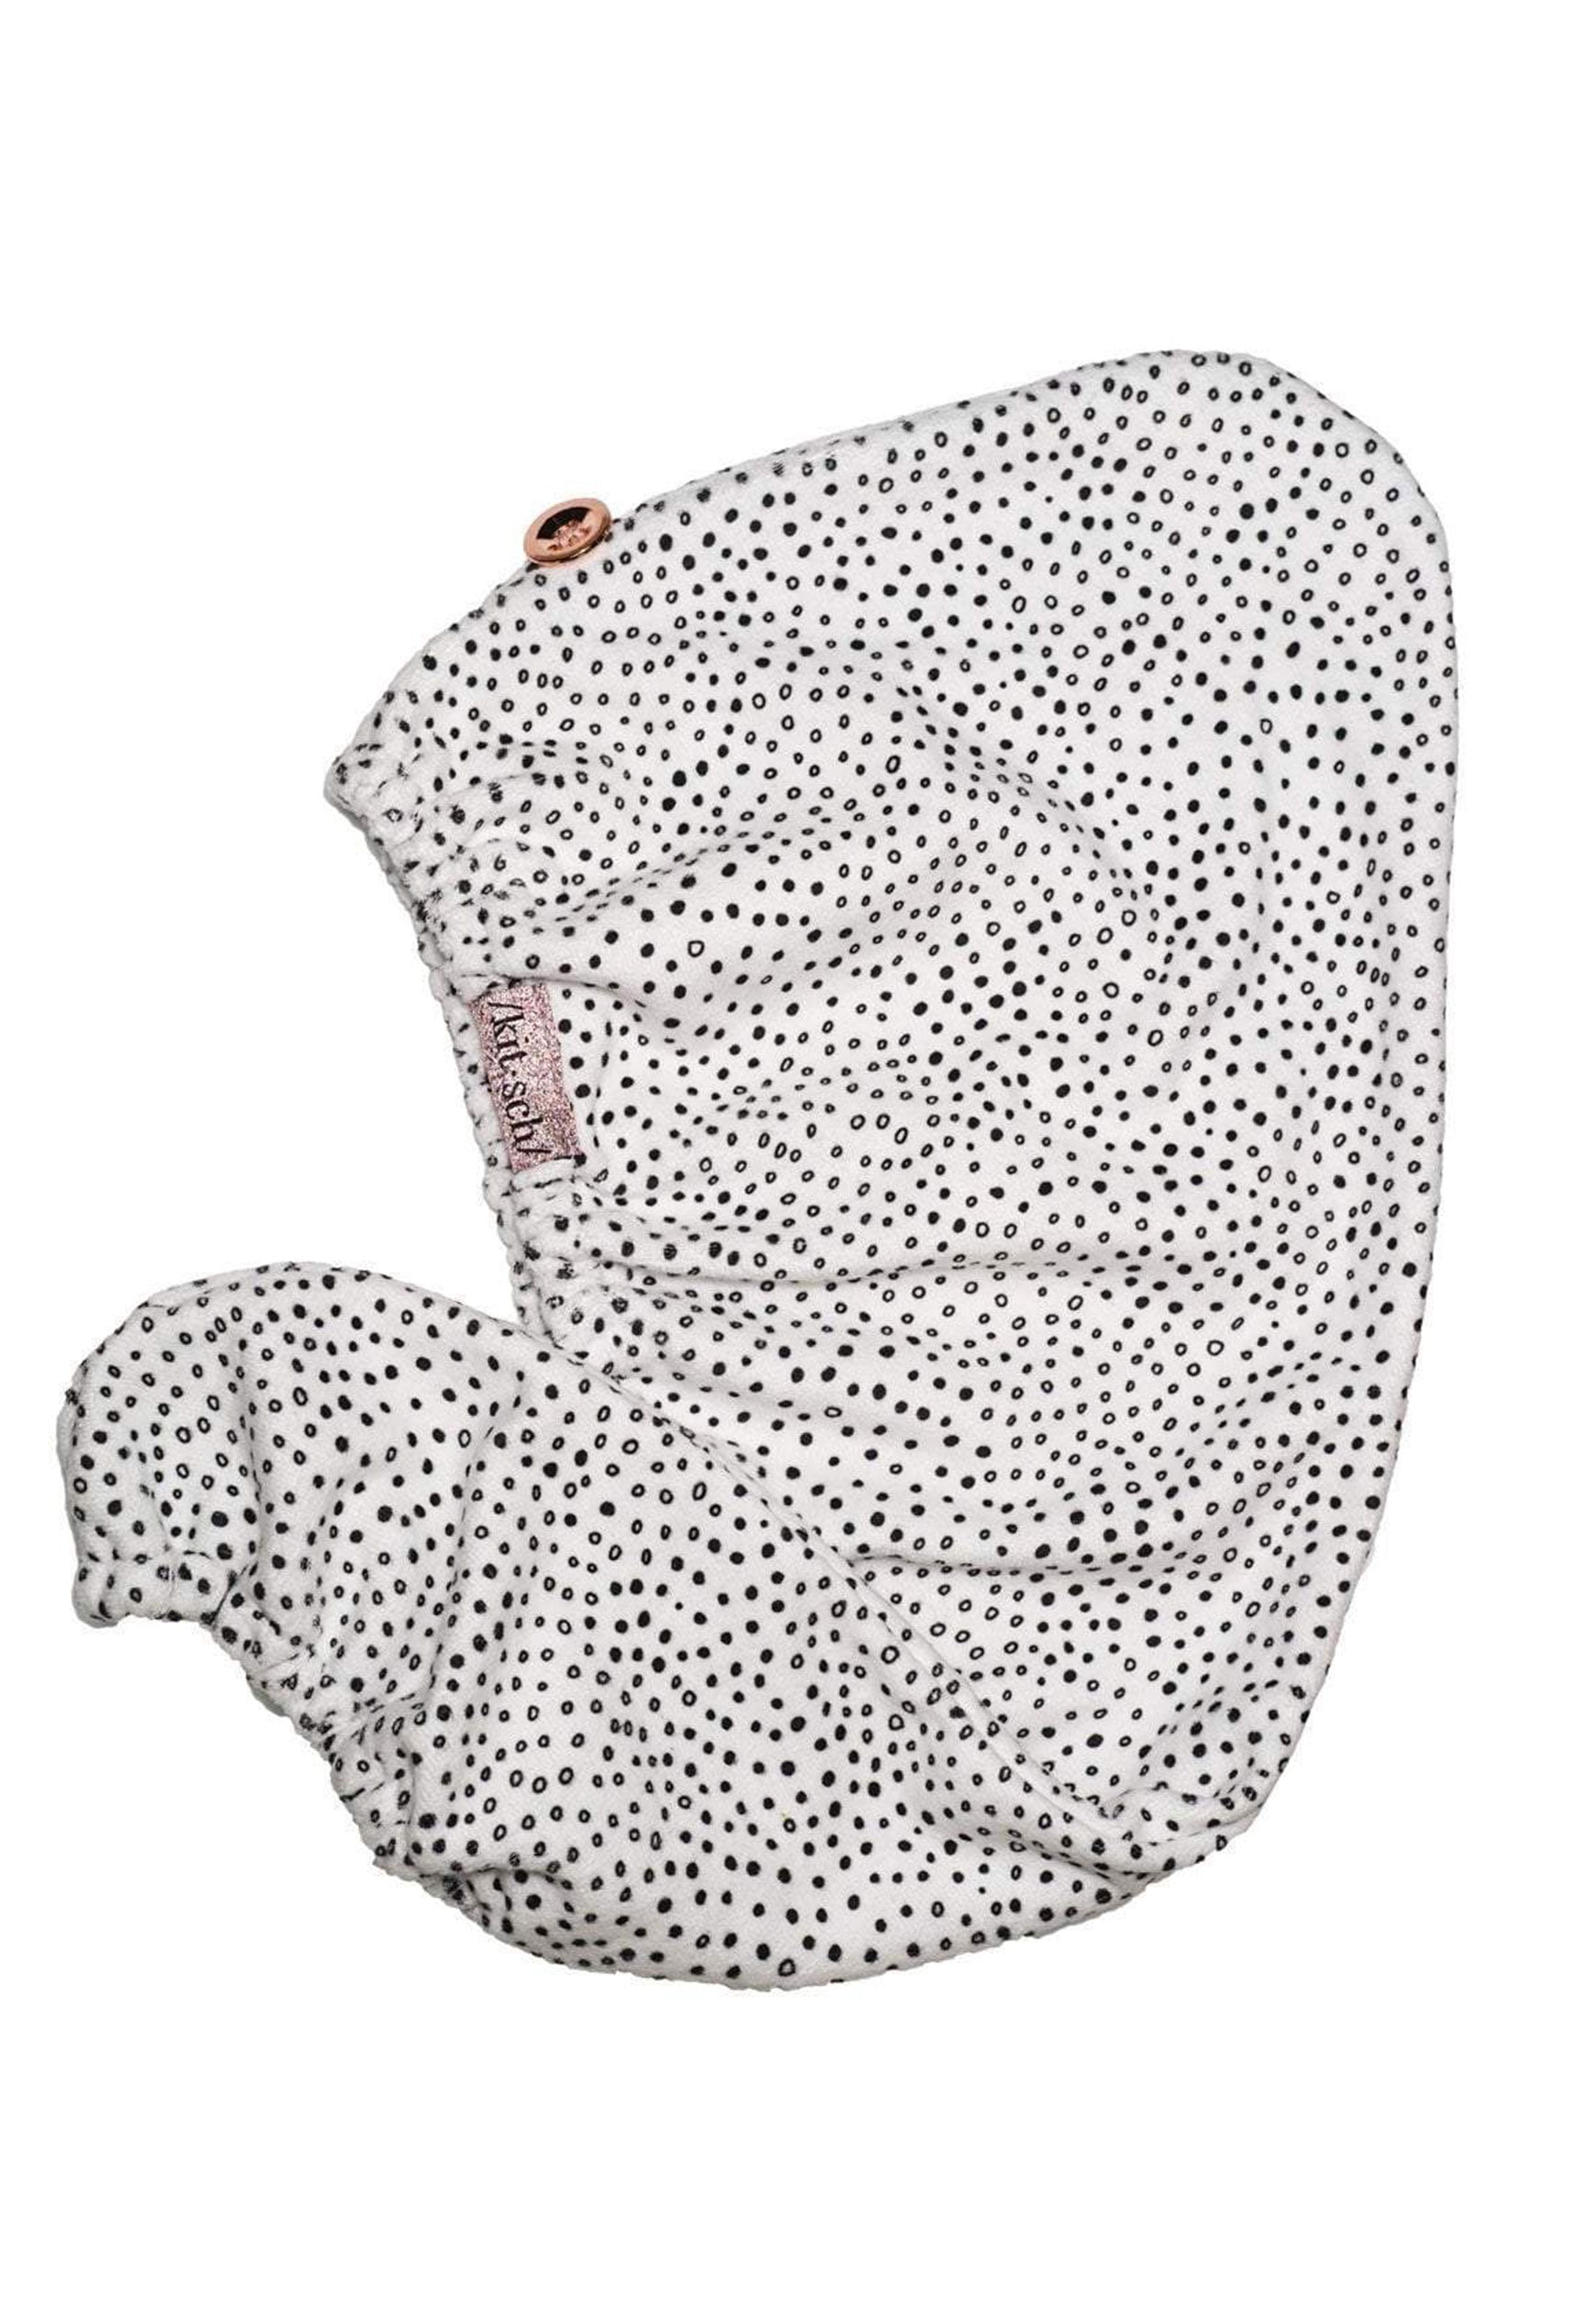 Kitsch Microfiber Hair Towel in Micro Dot, white hair towel with small black dots 